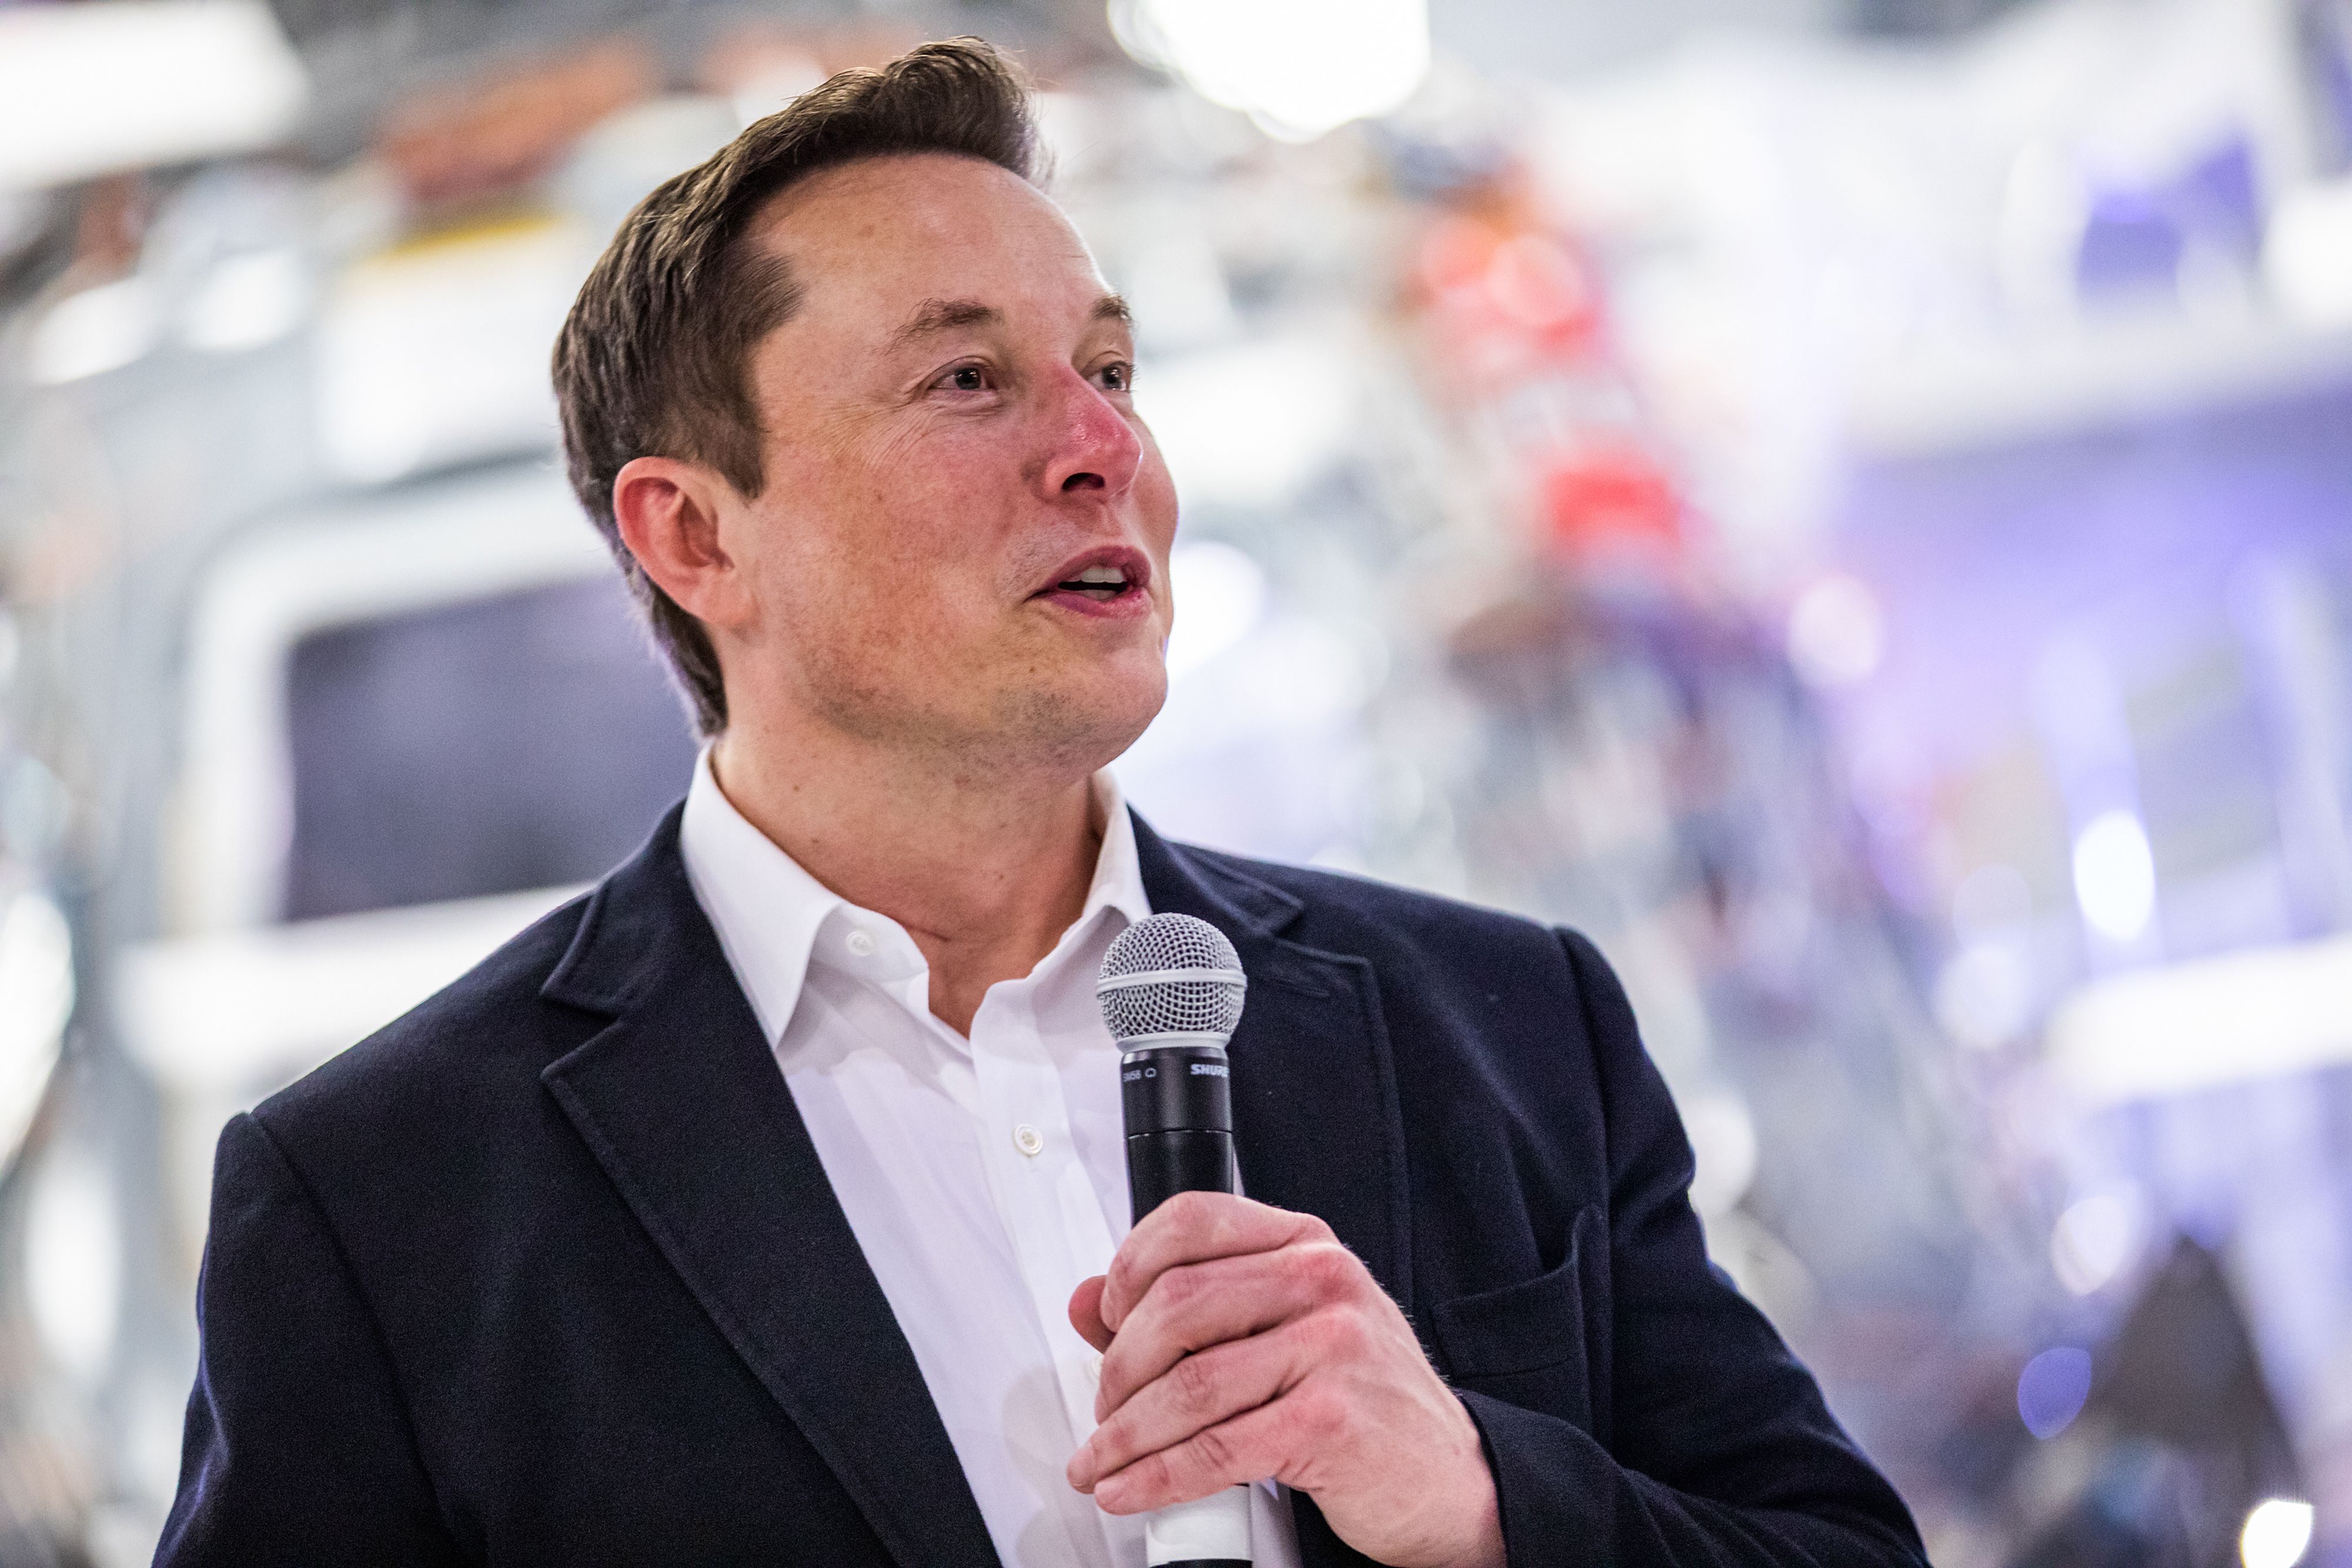 How Many Kids Does Elon Musk Have - SPACE EXPLORATION TECHNOLOGIES CORP.